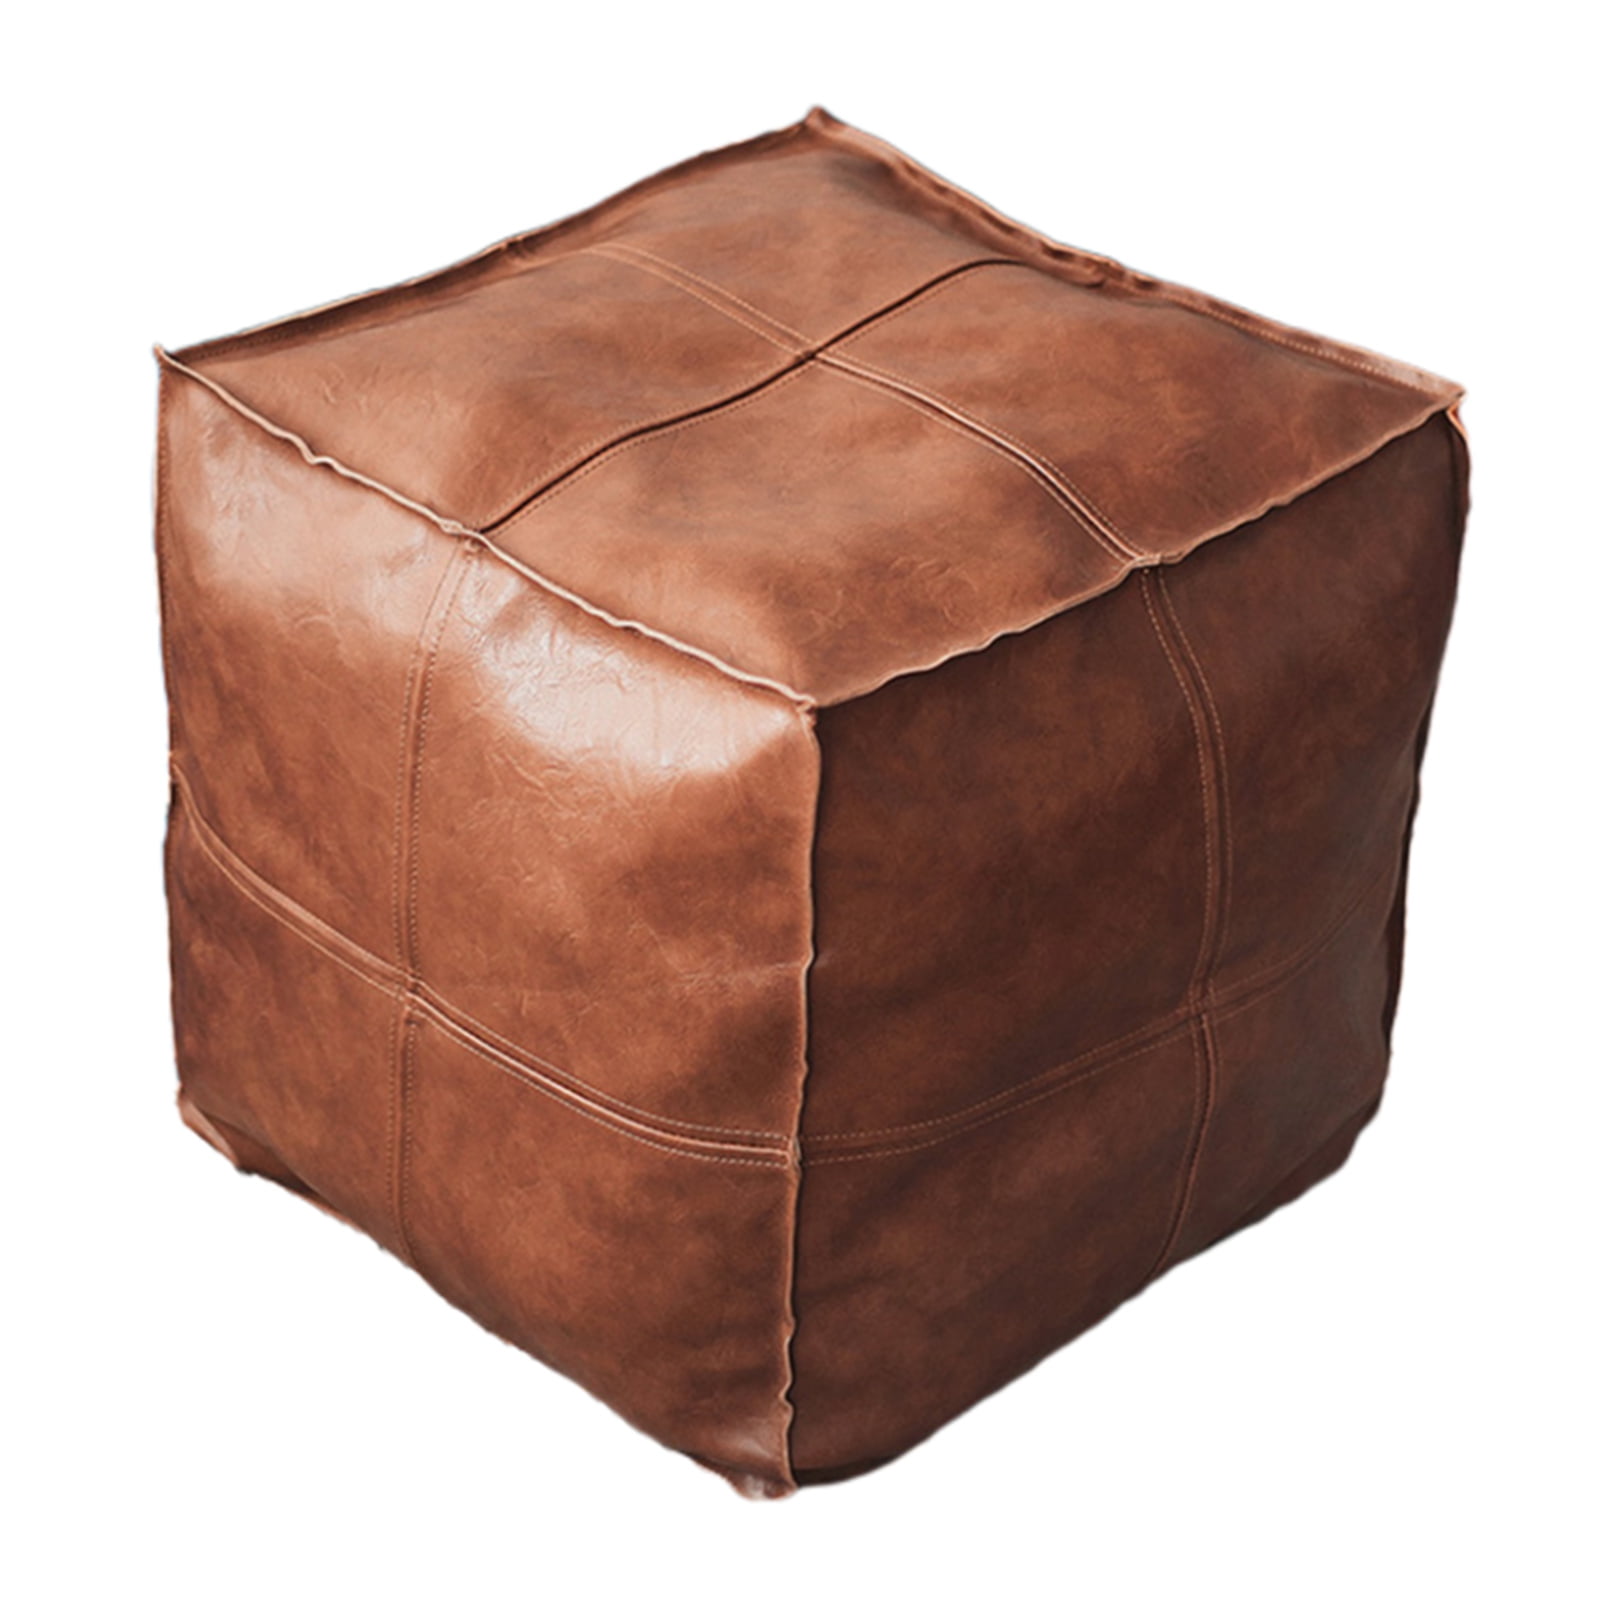 Pouf Moroccan Hassock Pooff Leather Pouff Ottoman Footstool MED Black/ Orange 